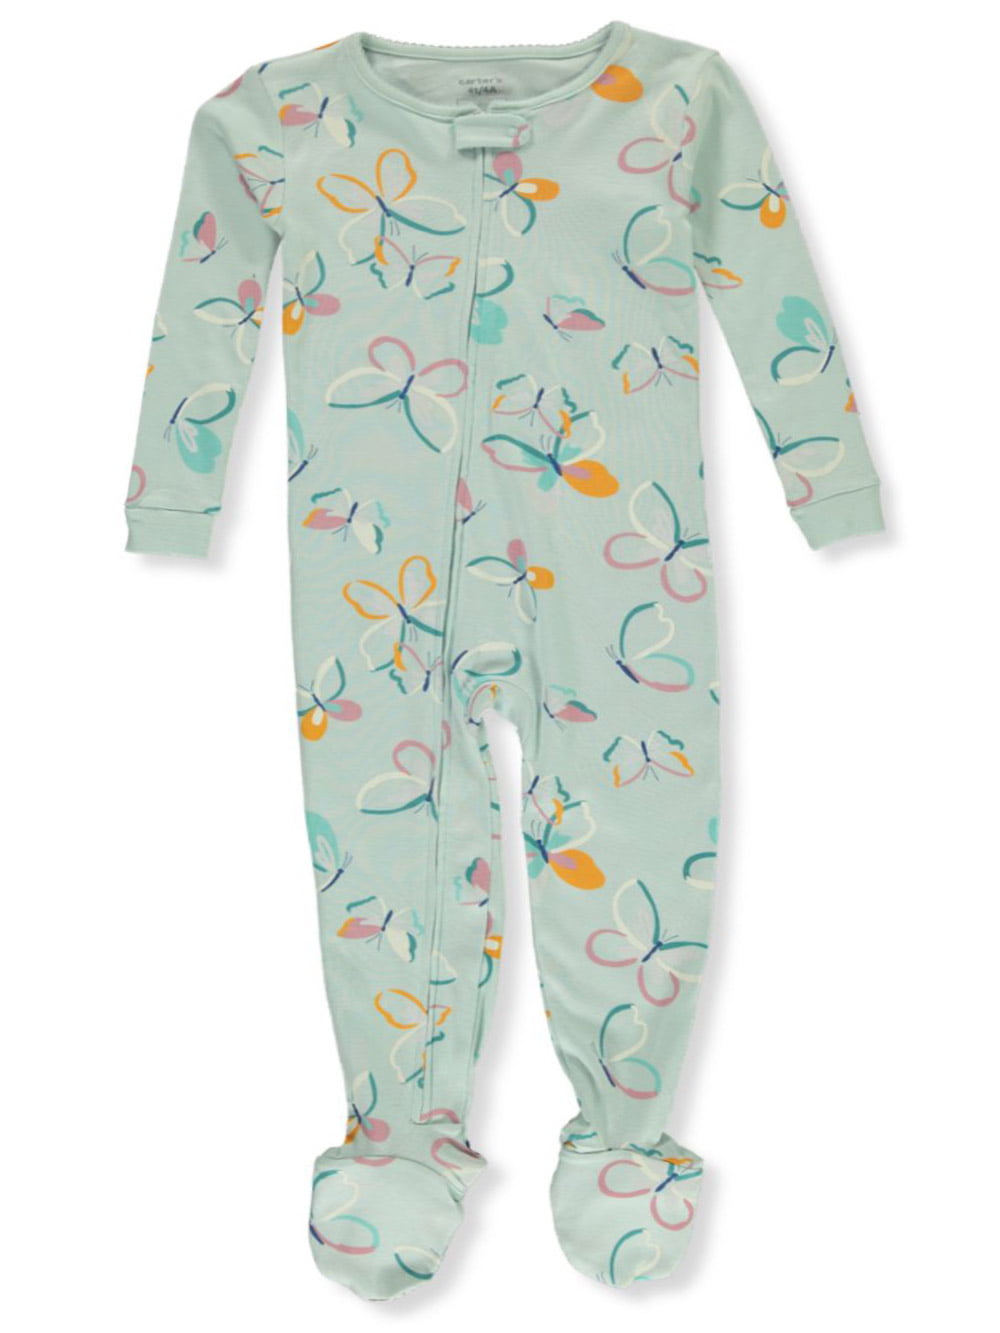 6 Months Teal Carter's Baby Infant Party Animal L/S Coveralls 